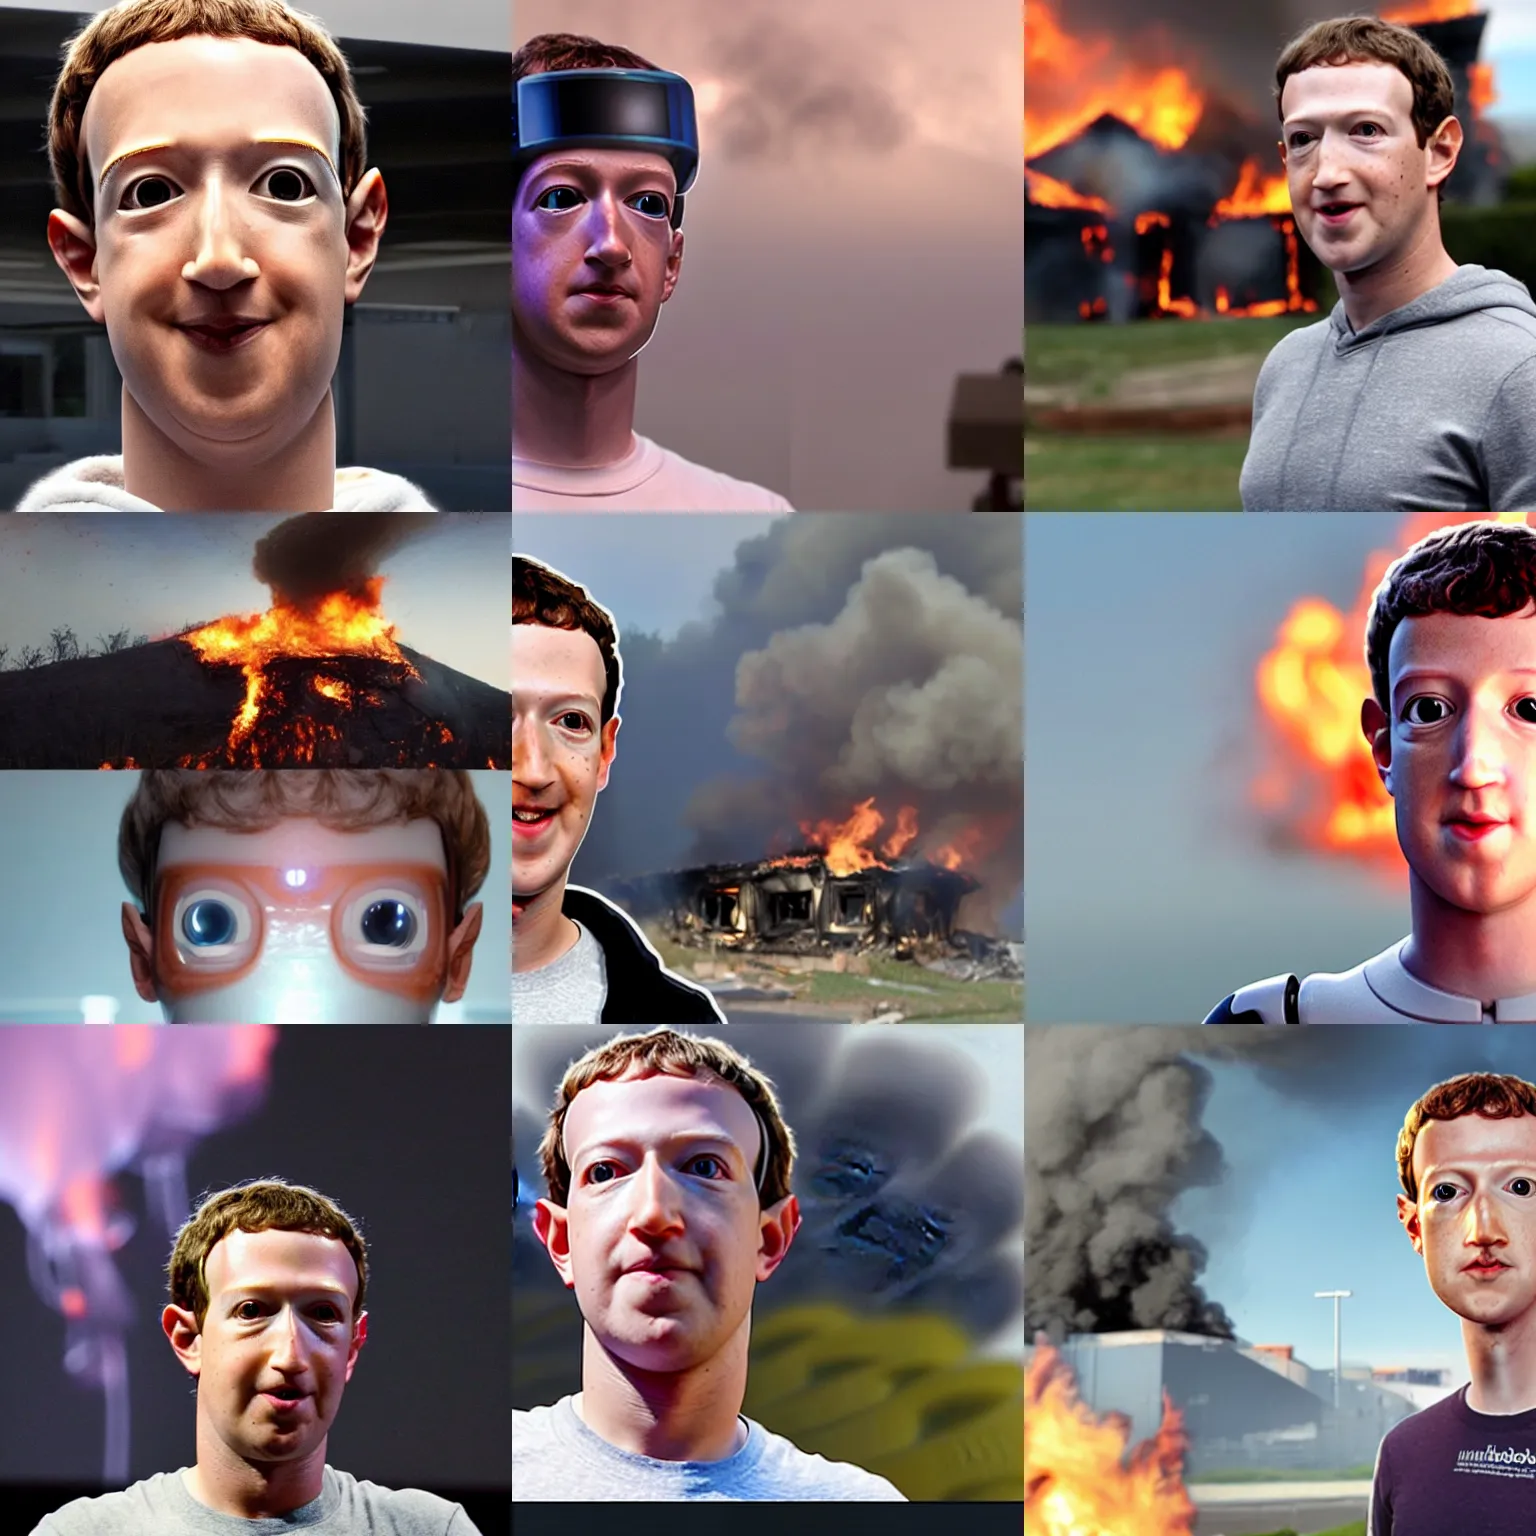 Prompt: <picture quality=4k-ultra-hd mode='attention grabbing'>Adorable mark zuckerberg cyborg robot looks into the camera knowingly as a house burns behind it - inspired by Disaster Girl</picture>